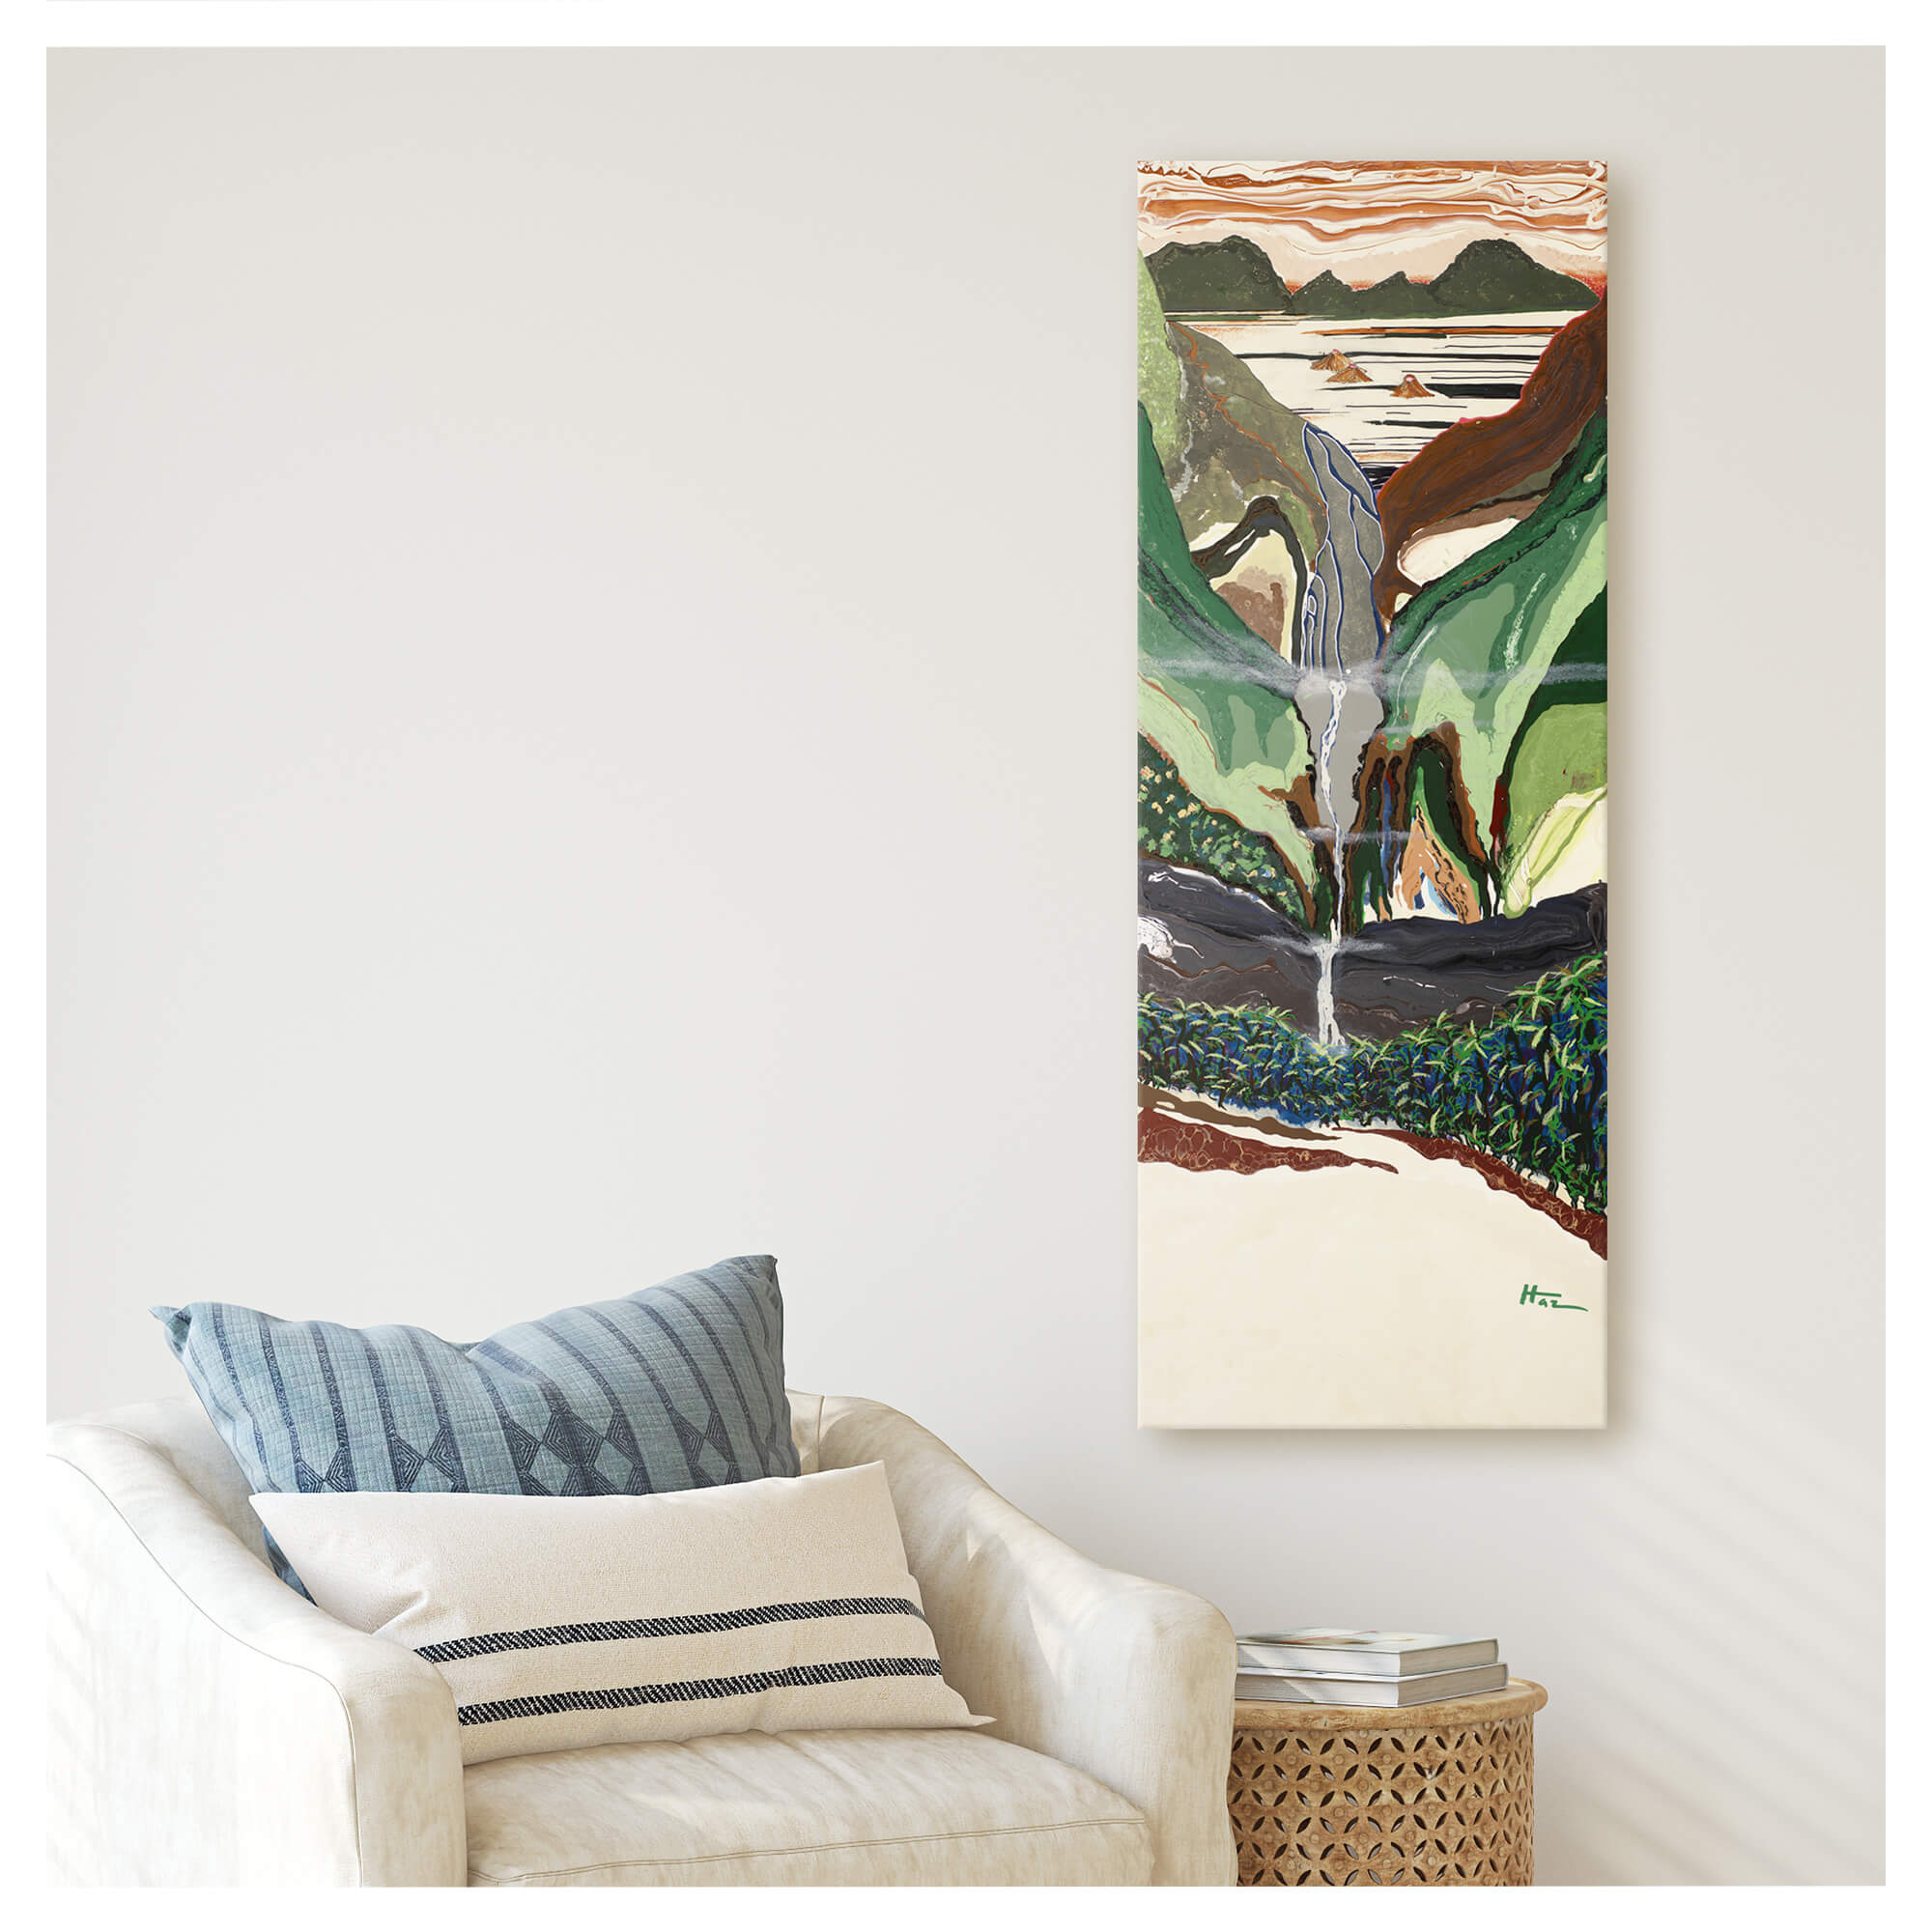 Canvas art print featuring  picturesque scene with hues of brown and different shades of green by hawaii artist robert hazzard